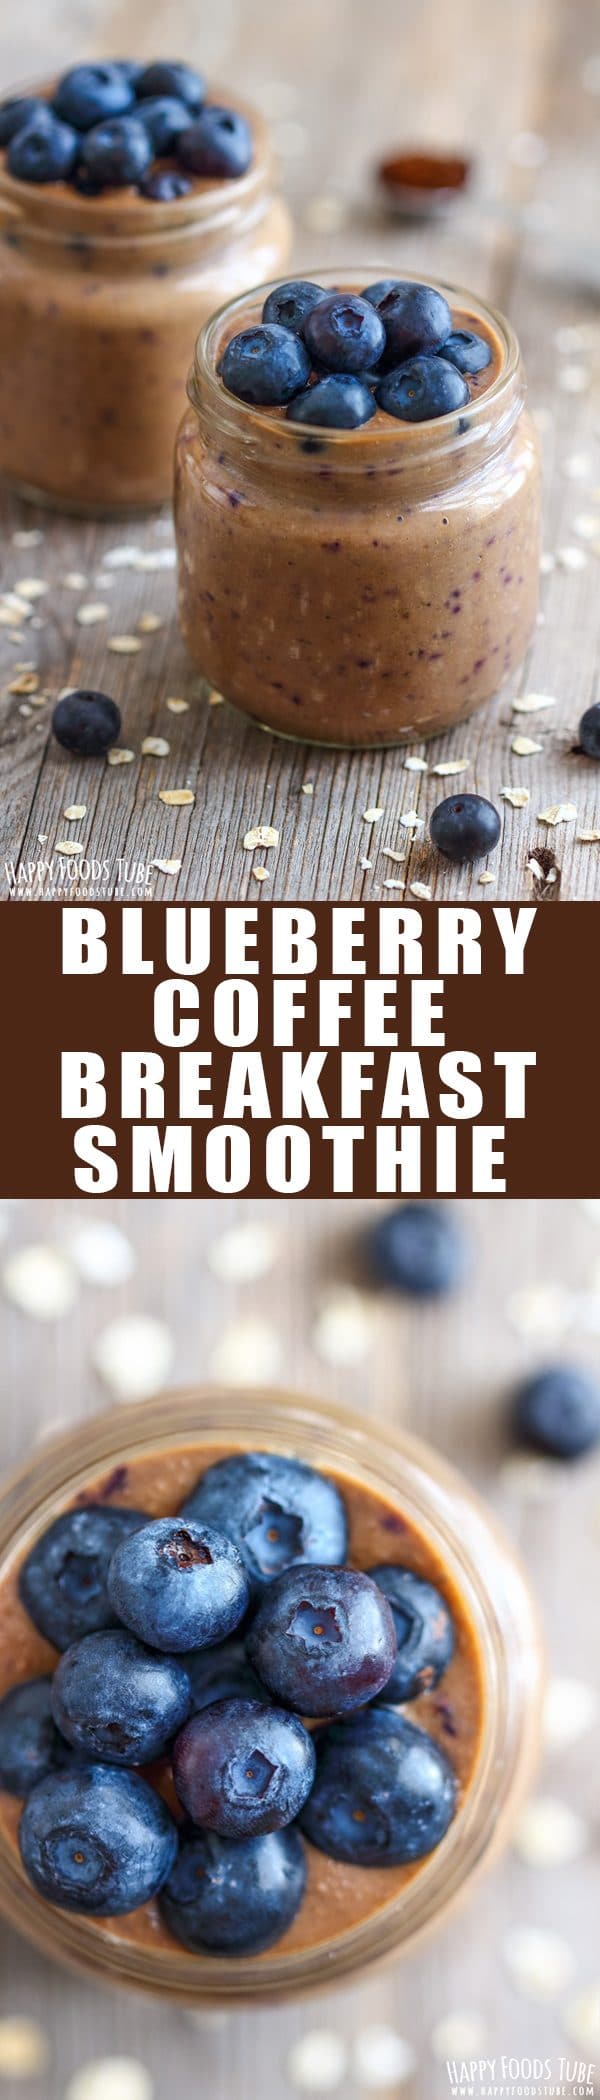 Can You Make Blueberry Coffee Smoothie In Tidore Kepulauan